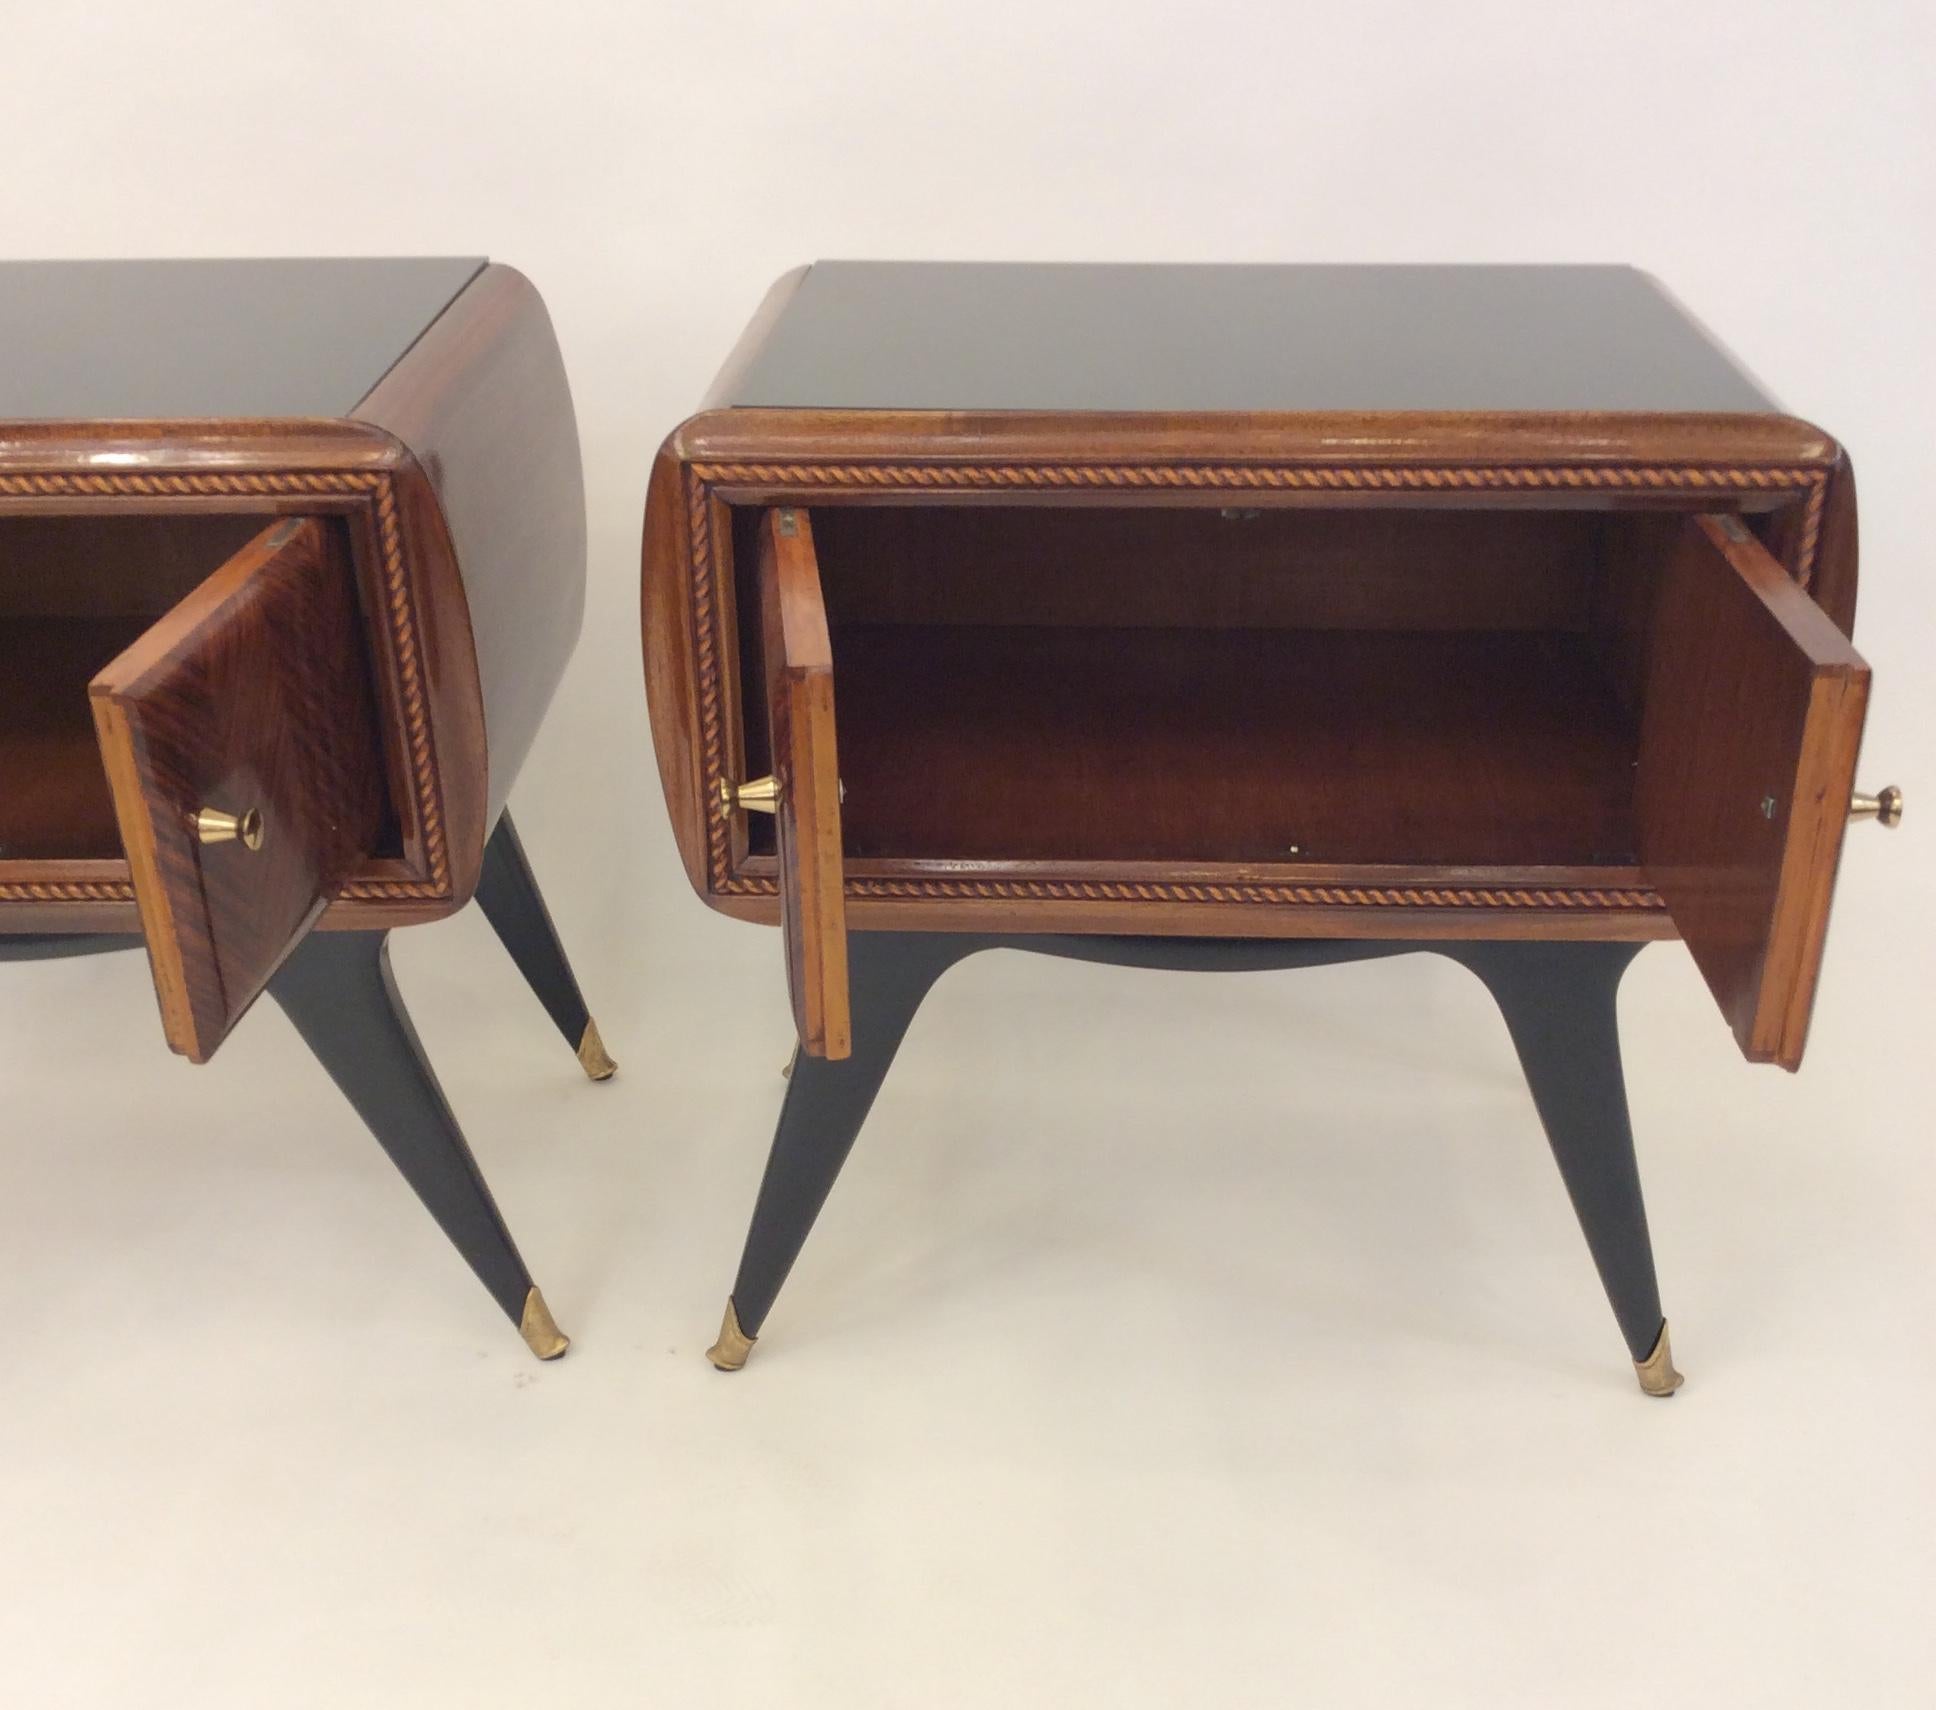 Pair of Italian Nightstands in the Style of Gio Ponti, circa 1950 For Sale 7